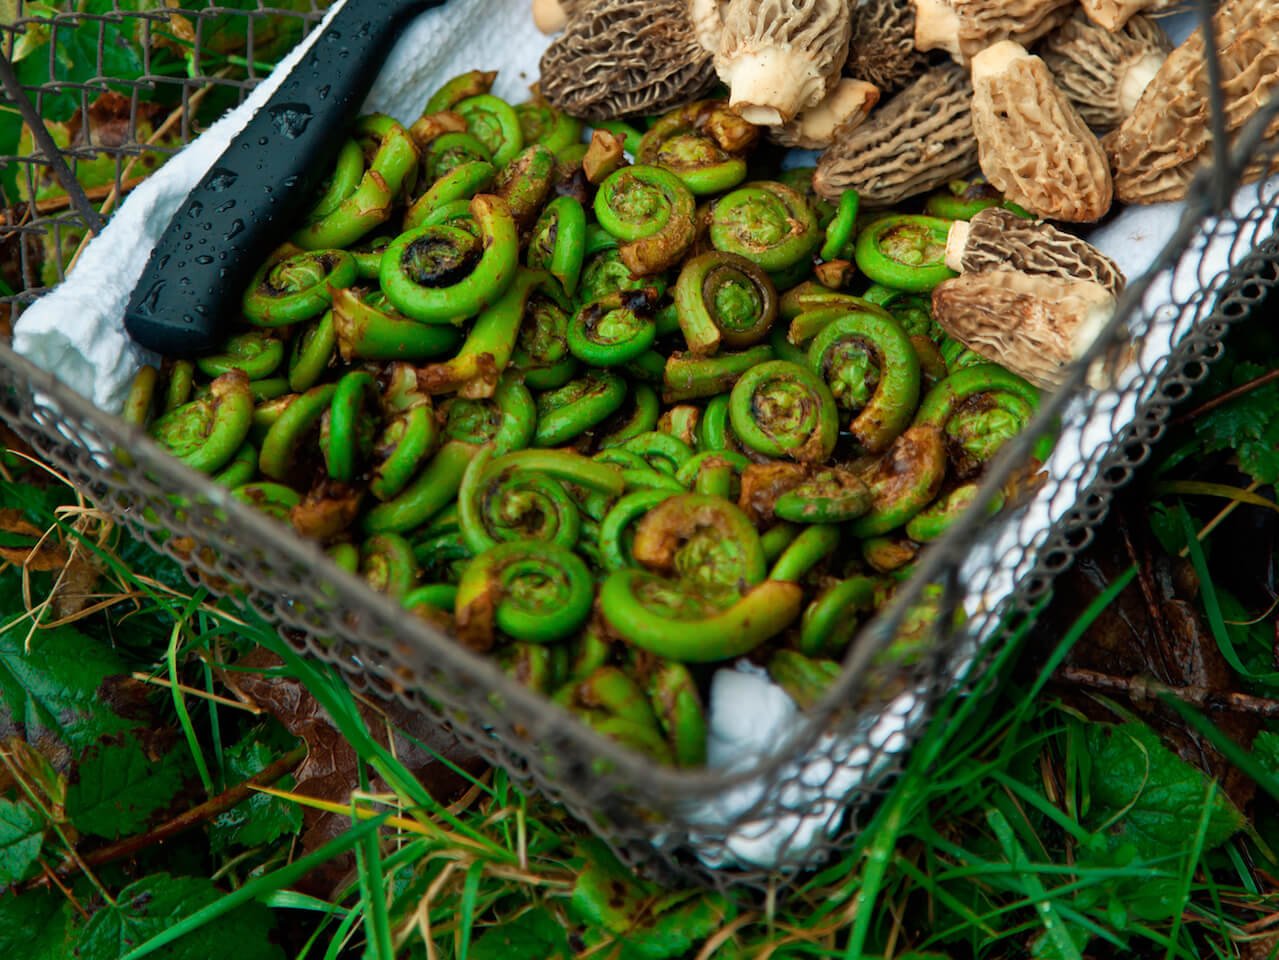 Fiddleheads and morrels in a basket.